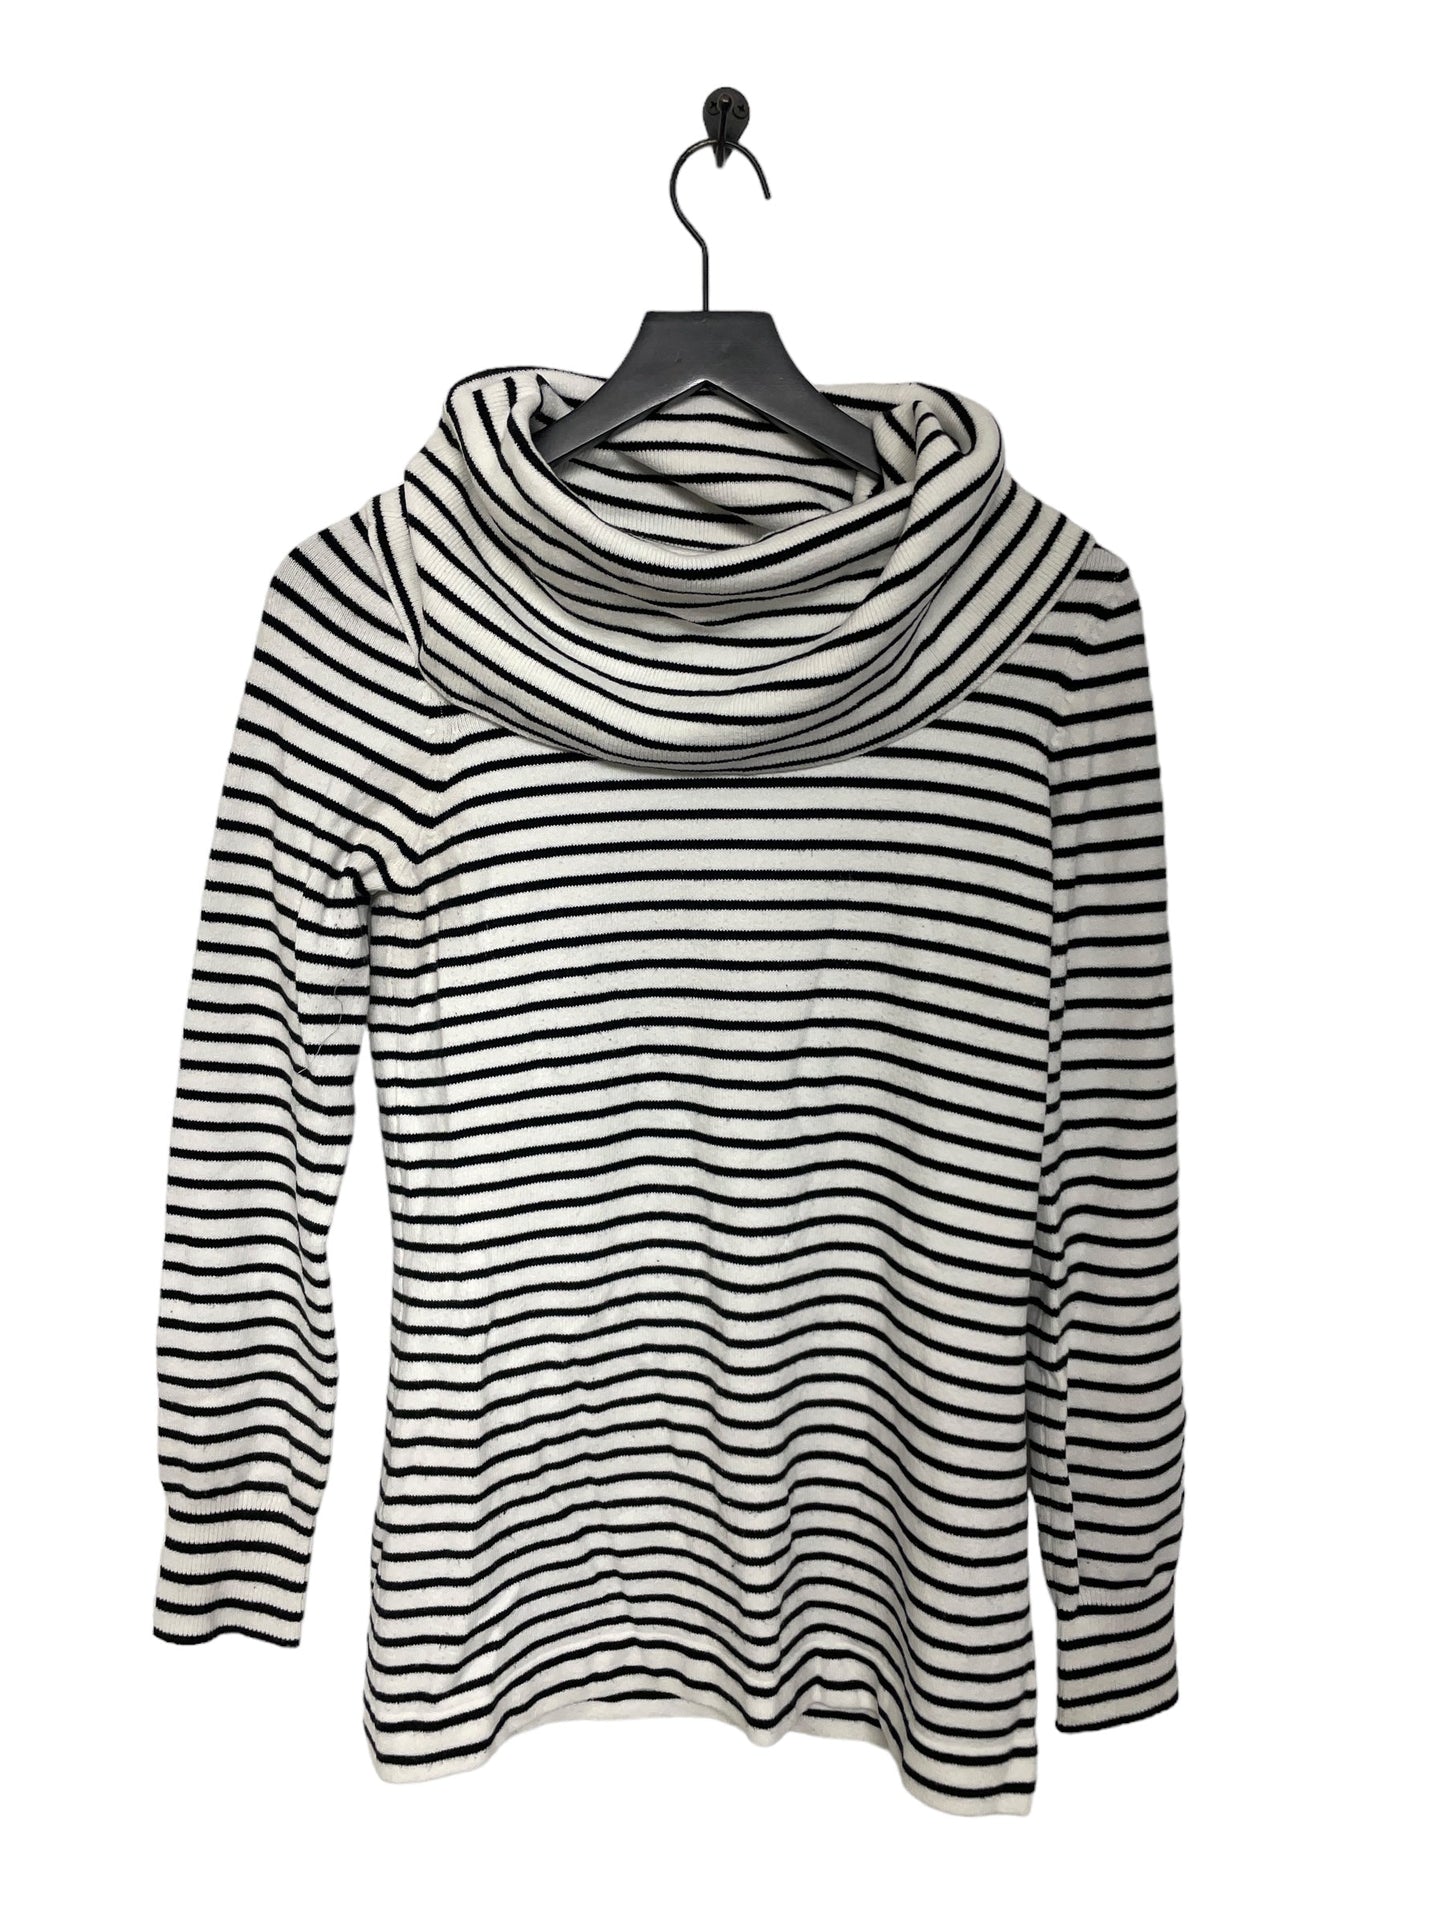 Striped Sweater French Connection, Size S